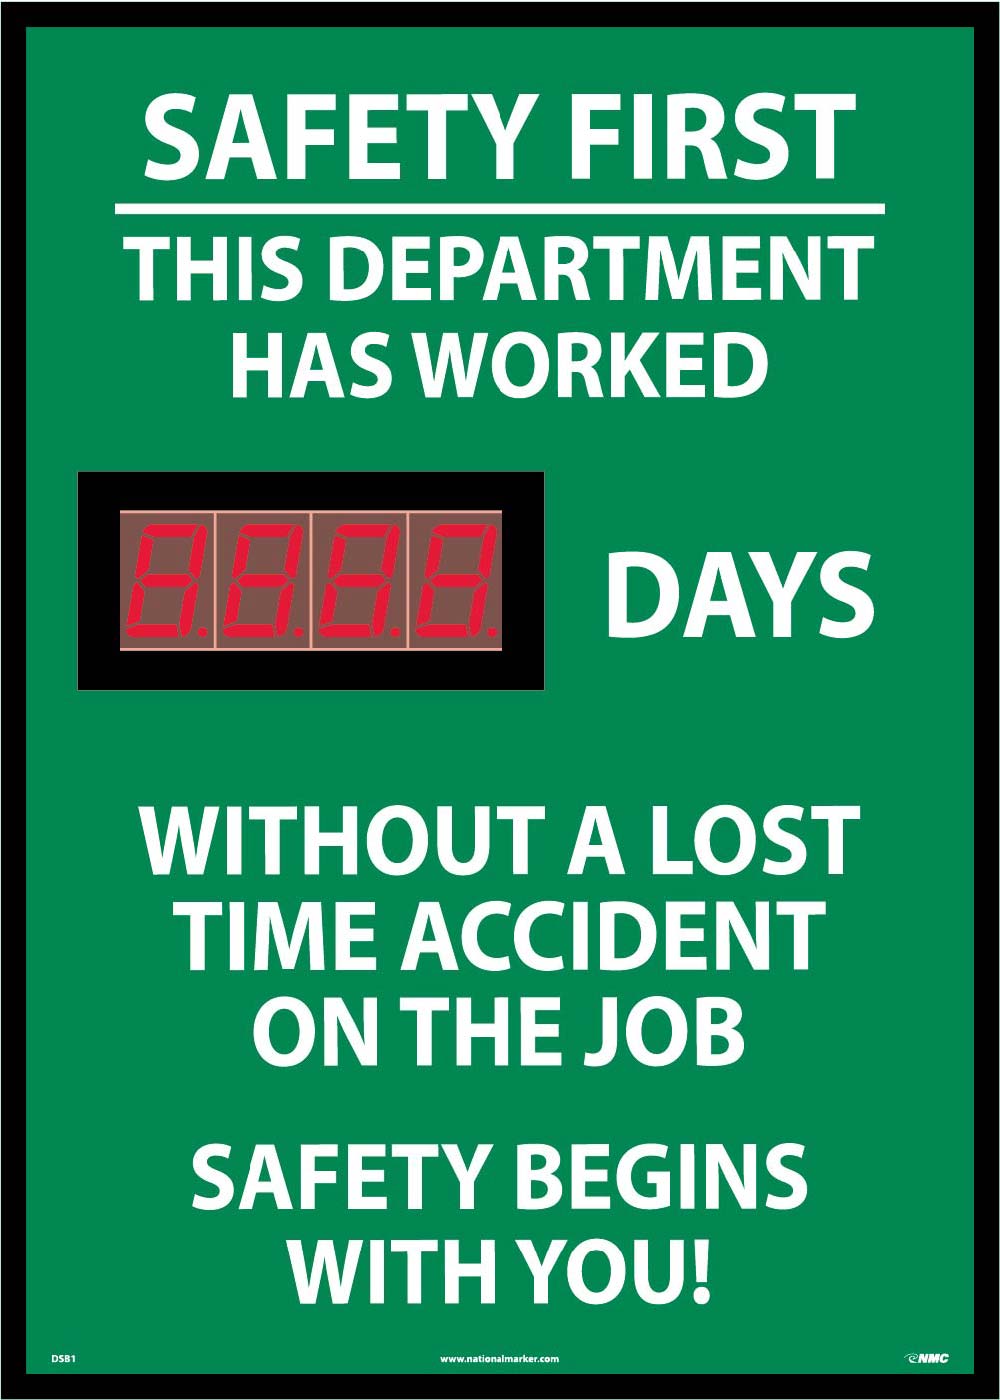 Safety First This Department Has Worked Digital Scoreboard-eSafety Supplies, Inc